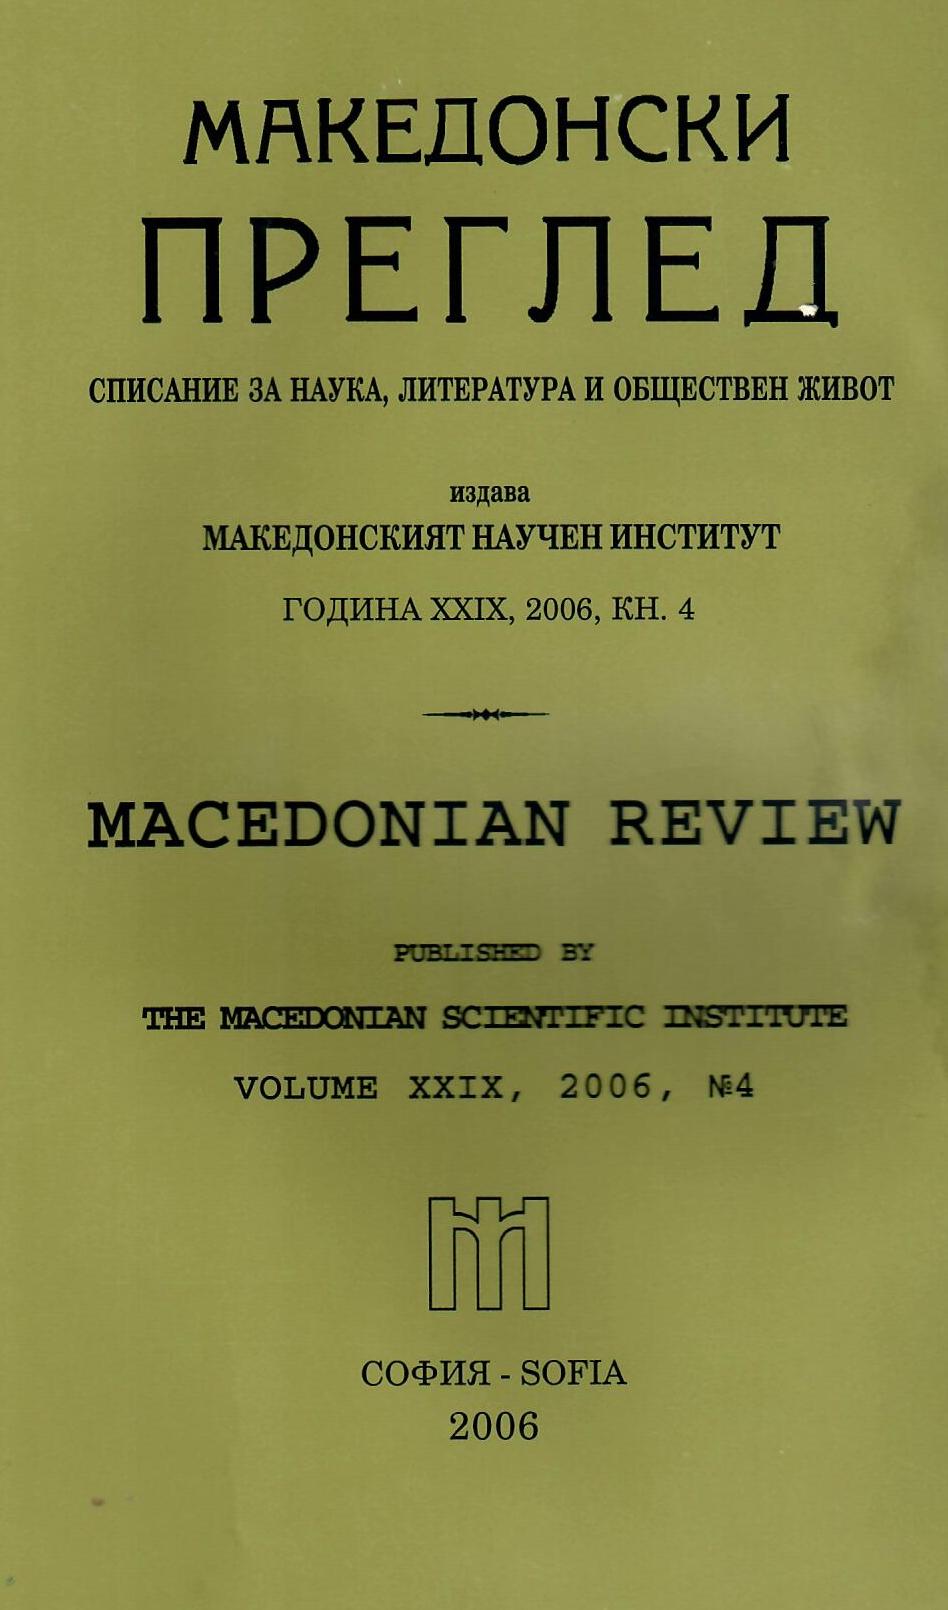 Fugitives and fugitive organizations in Bulgaria in the period 1940 — 1990 (2nd part) Cover Image